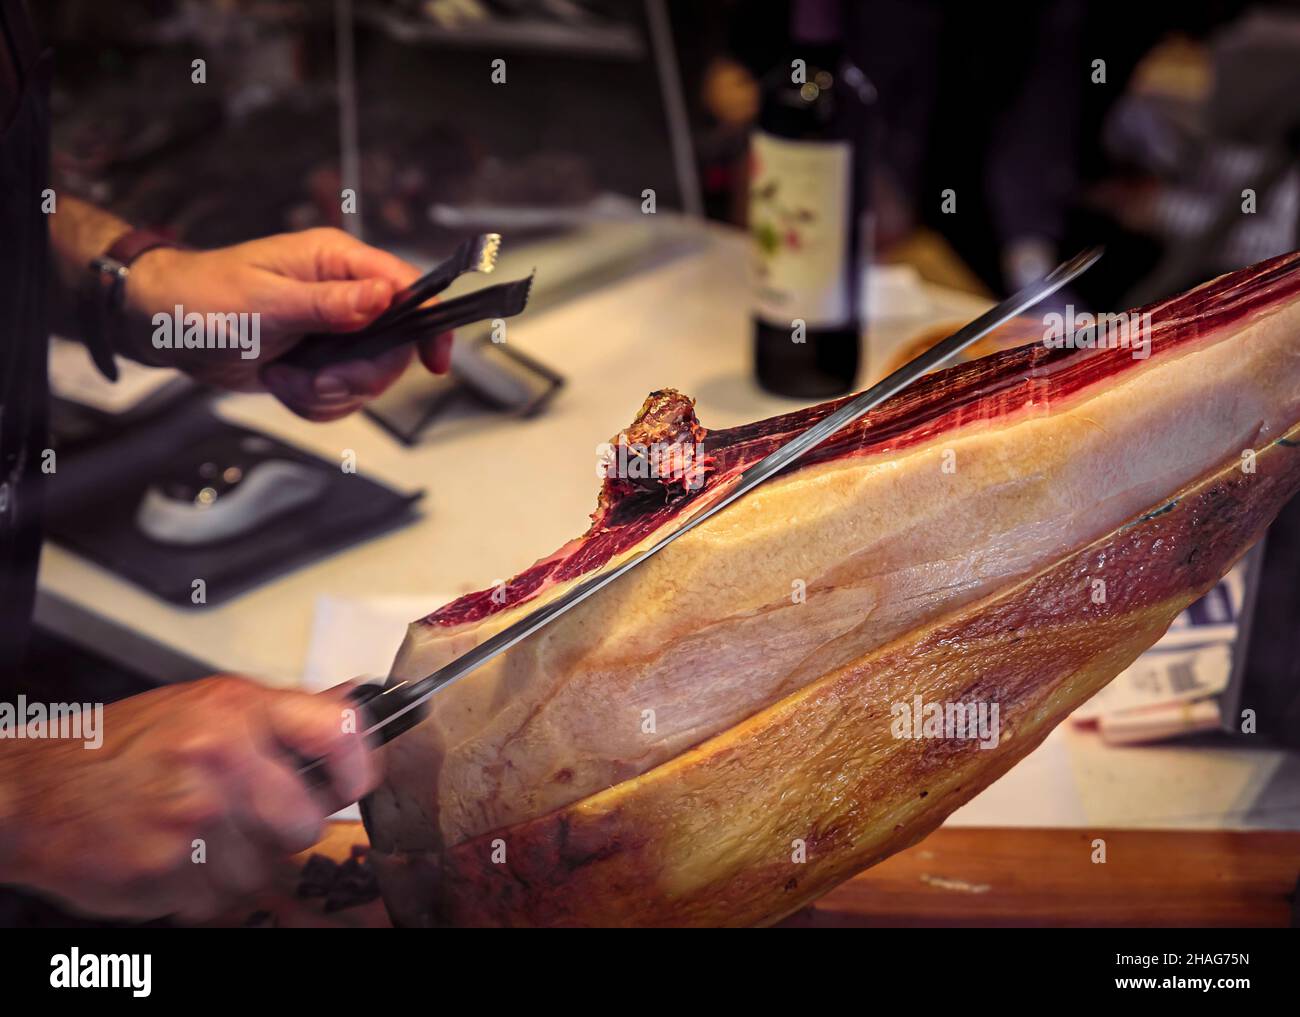 Whole bone-in leg of Spanish serrano iberico ham being carved at a local butcher shop in a restaurant, San Sebastian Donostia, Basque Country, Spain Stock Photo